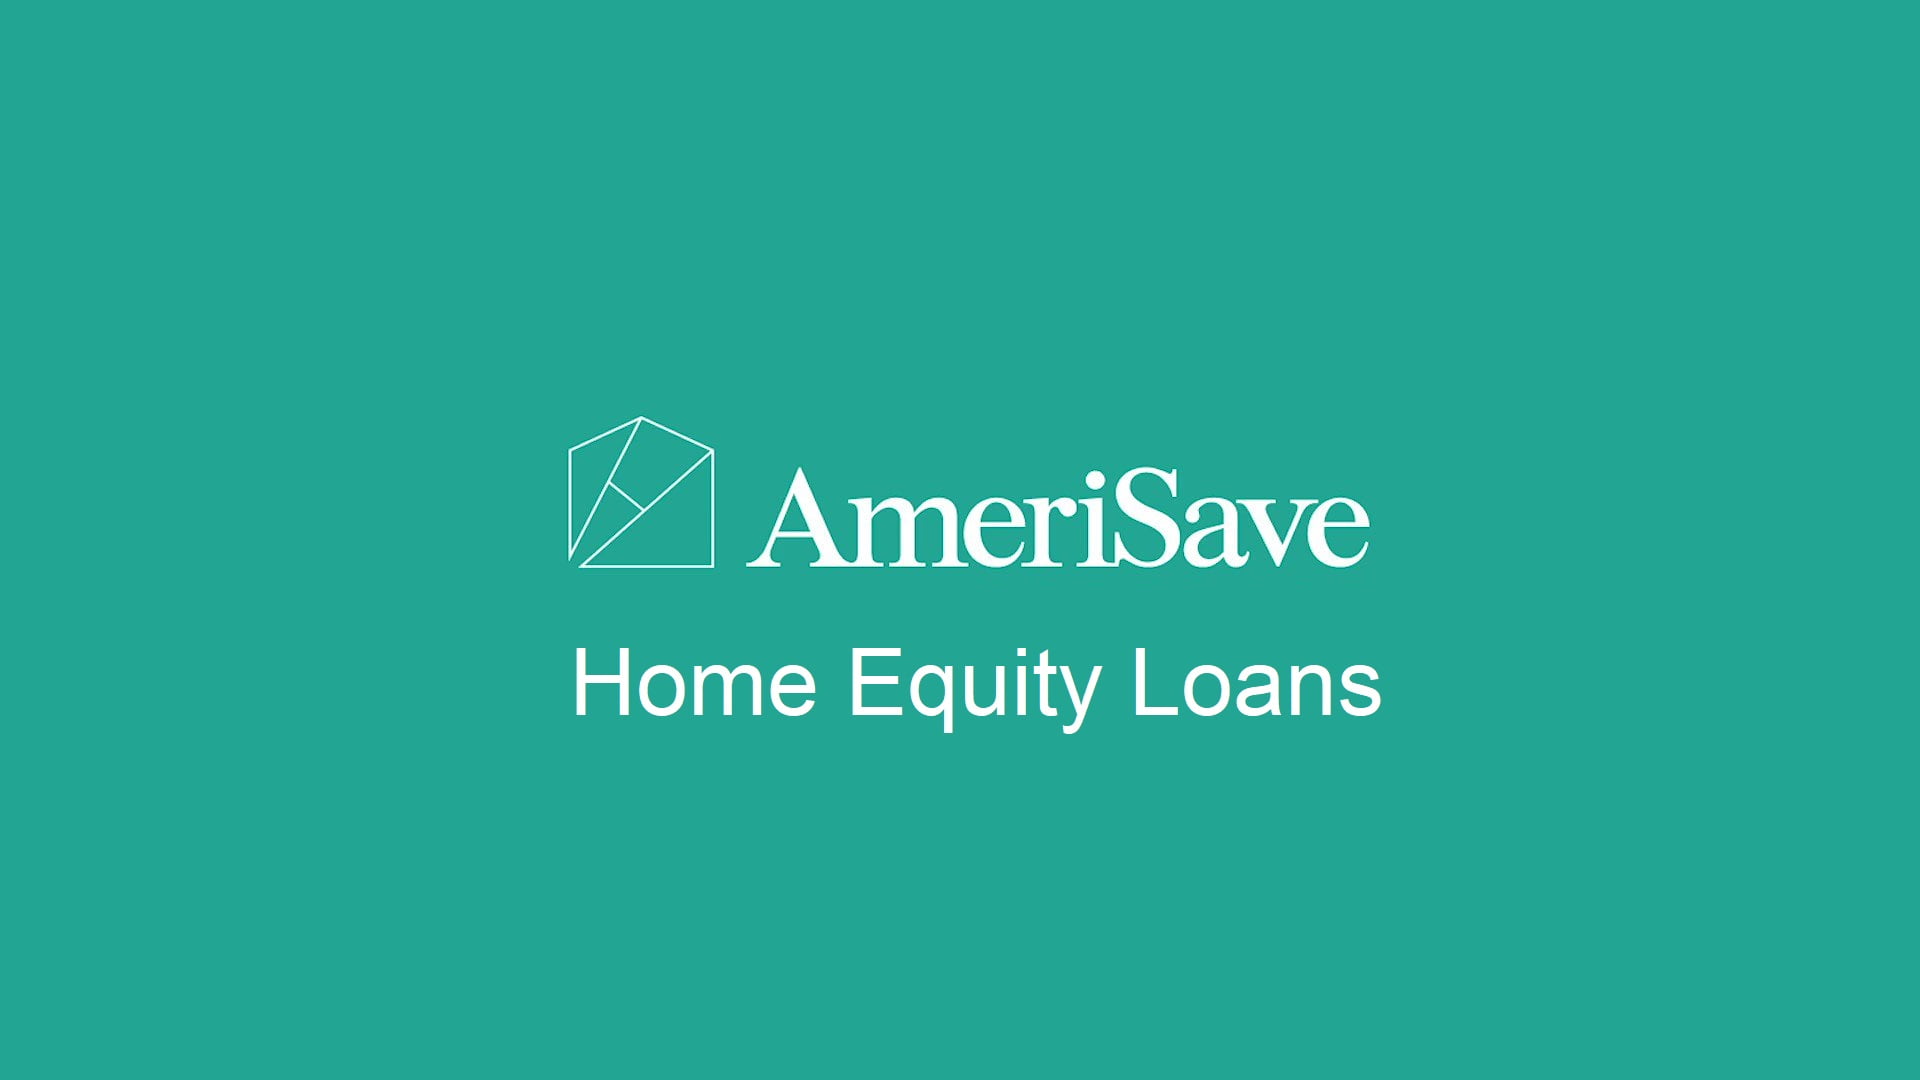 AmeriSave Home Equity Loans